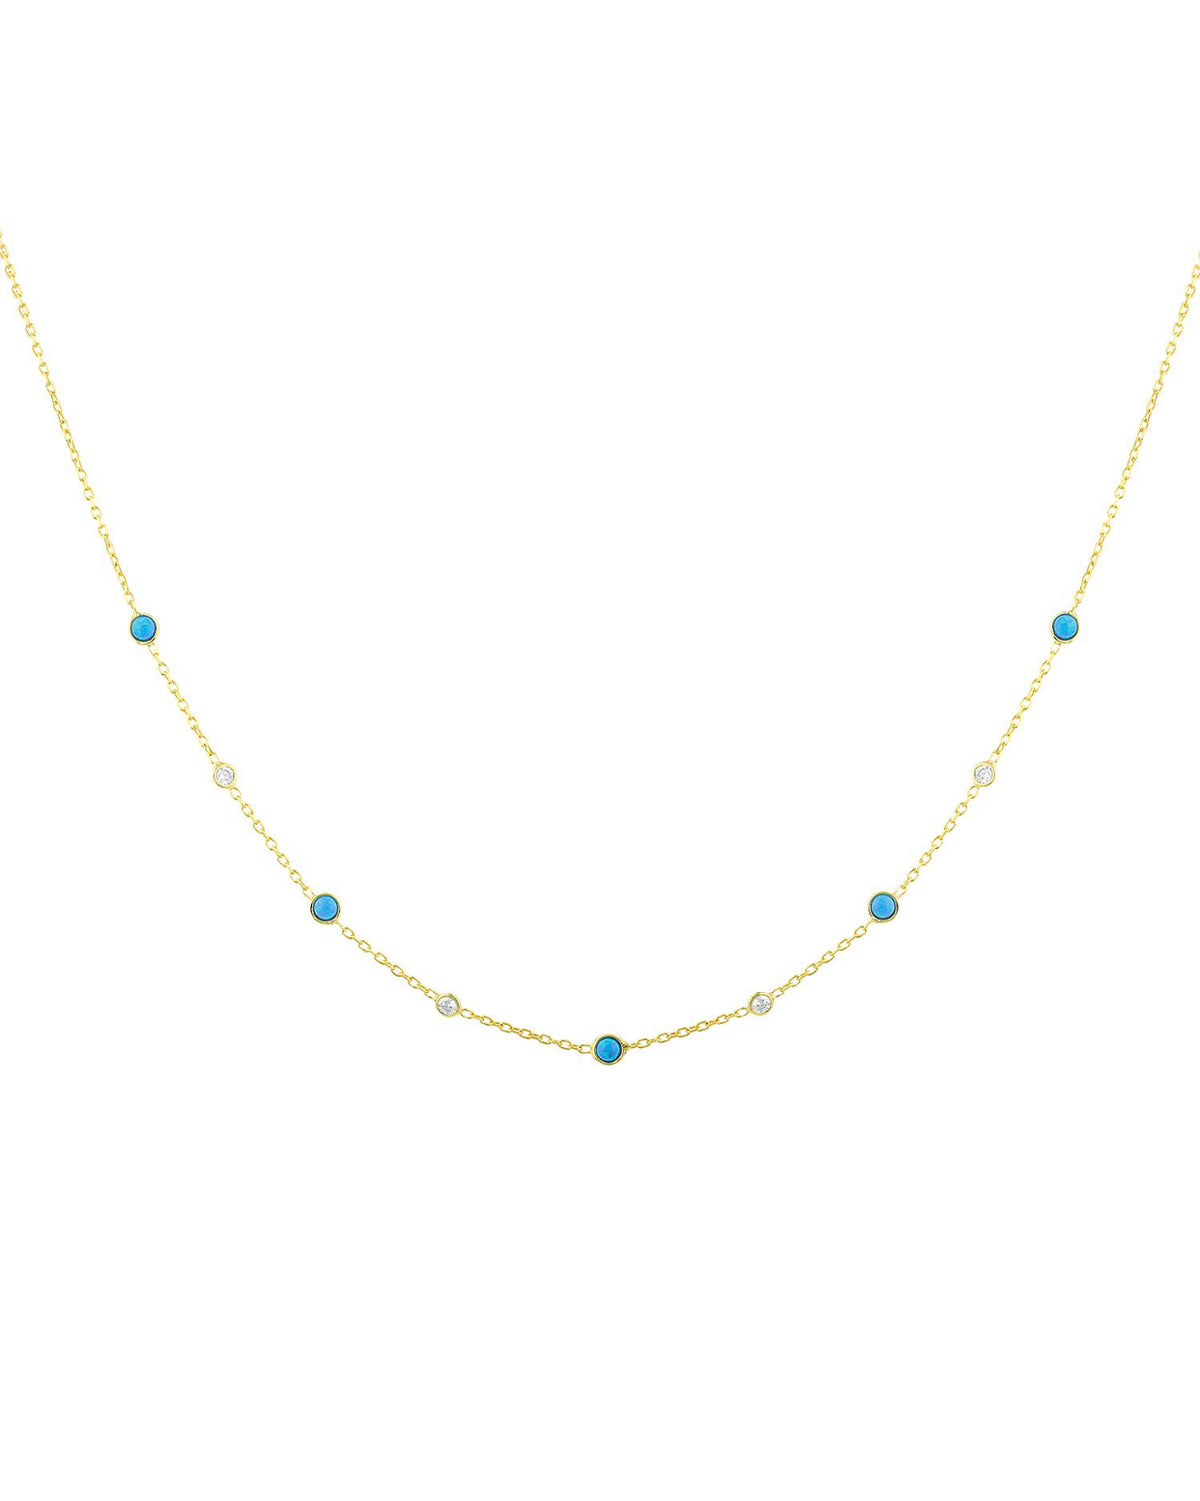 SIMPLE TURQUO NECKLACE